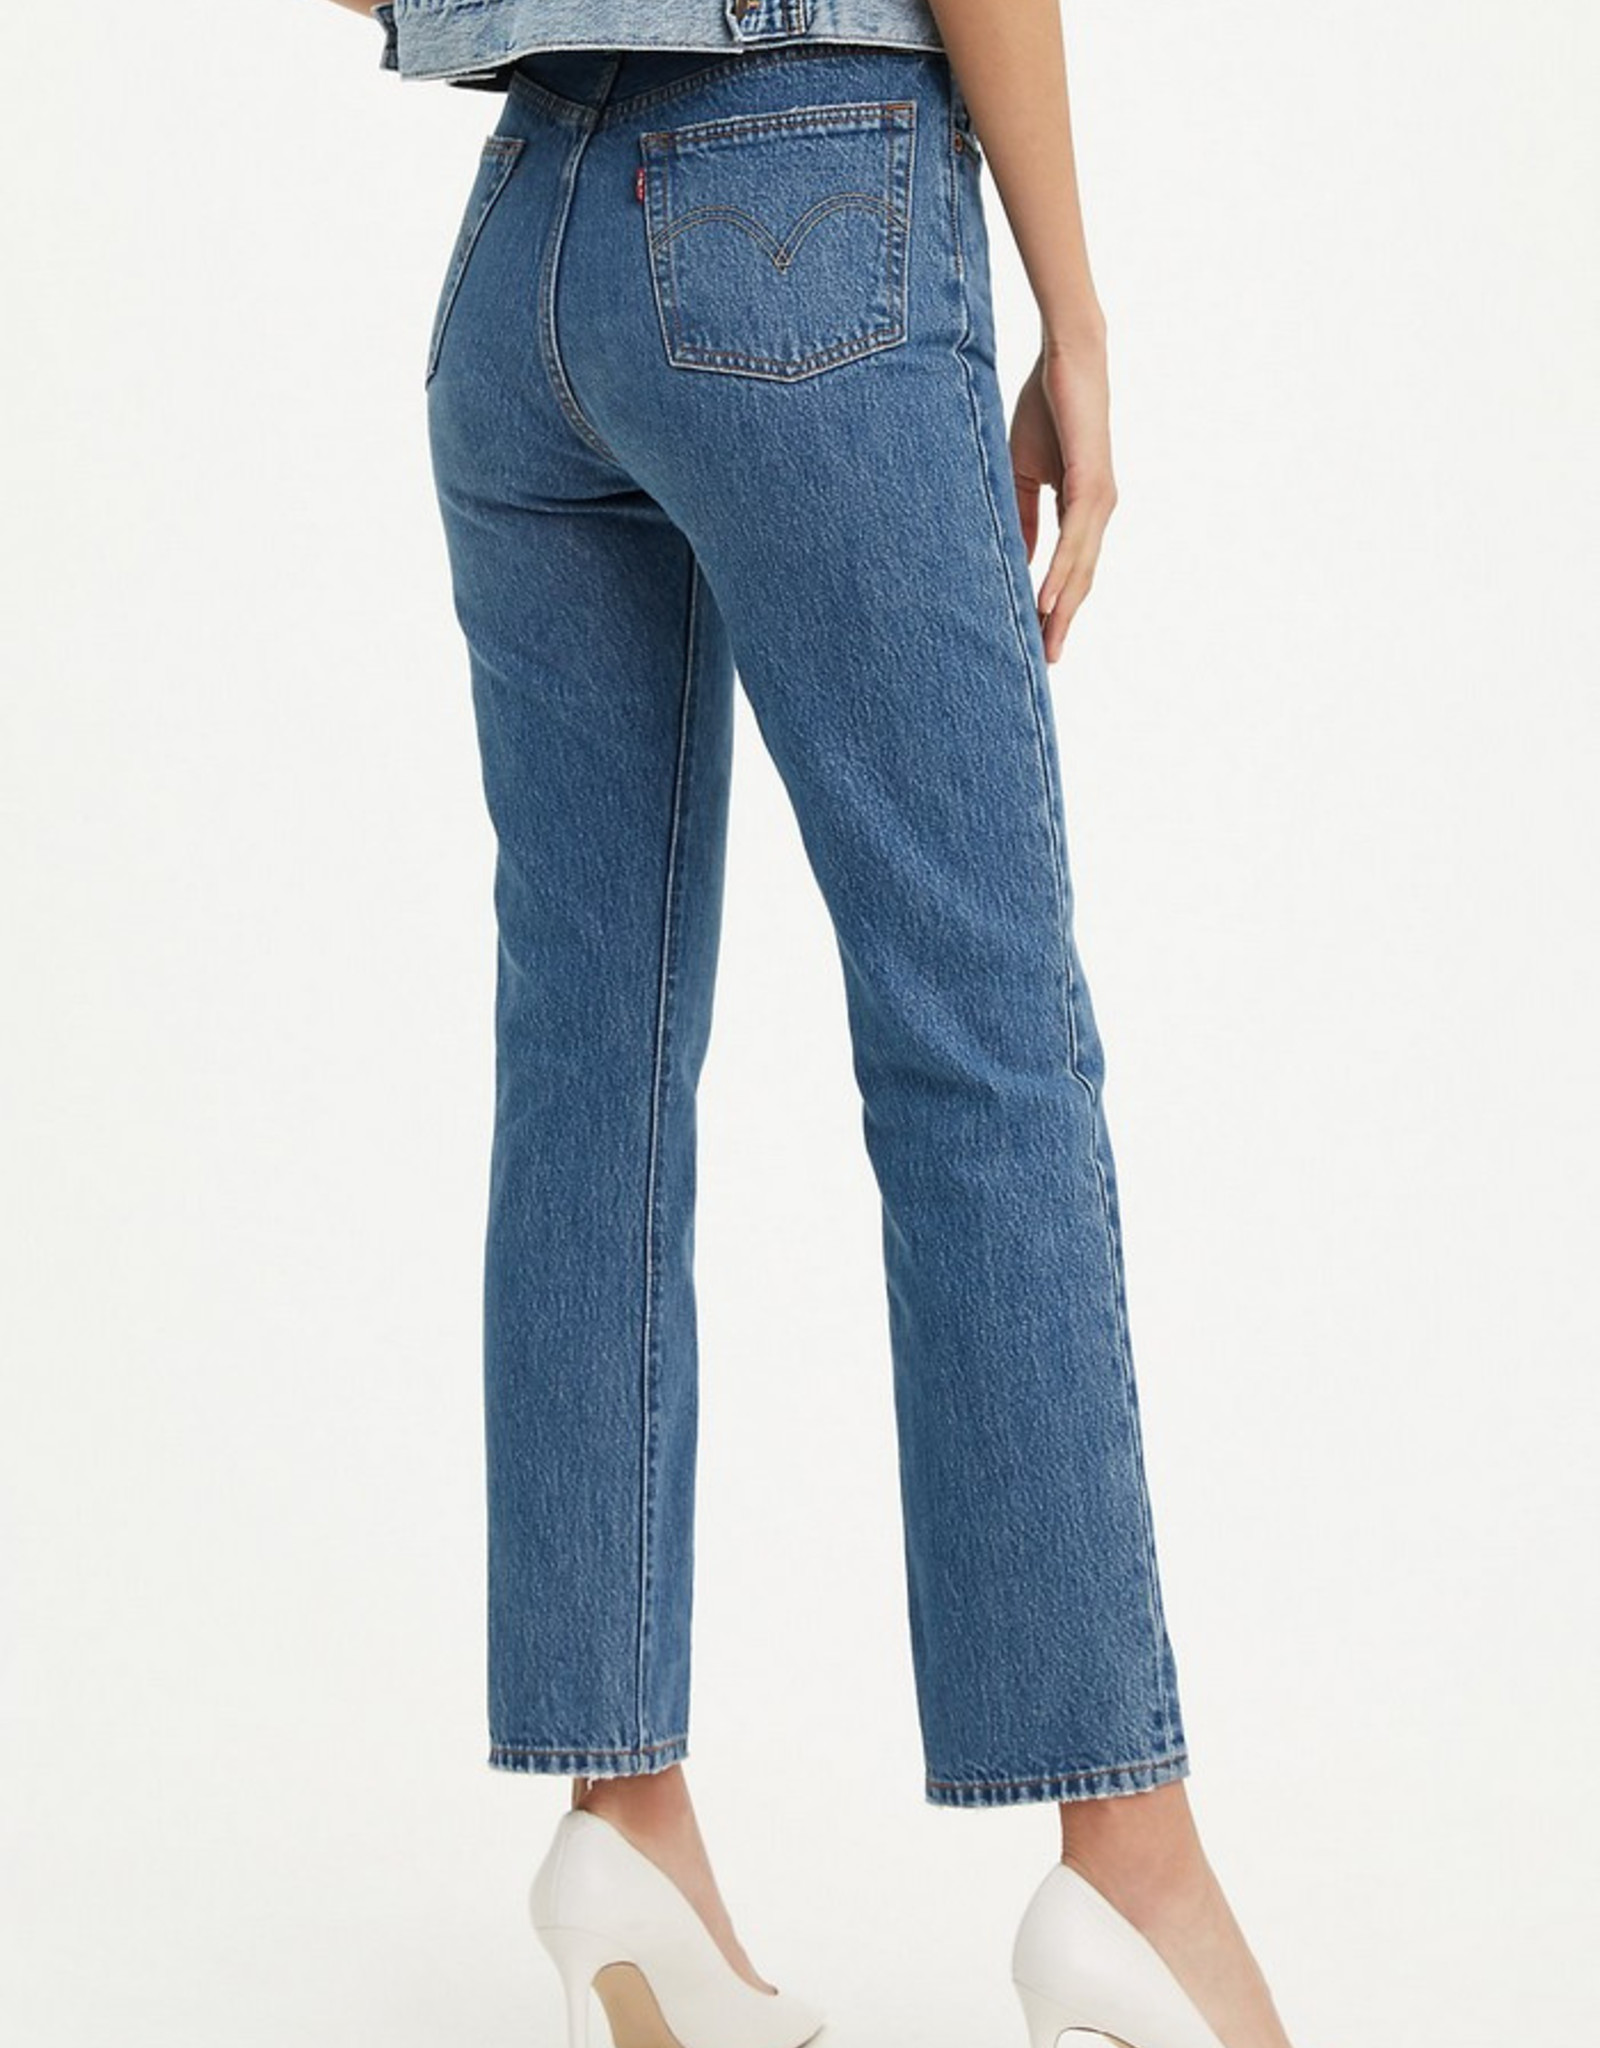 Levi's 501® Jeans For Women Athens Dark